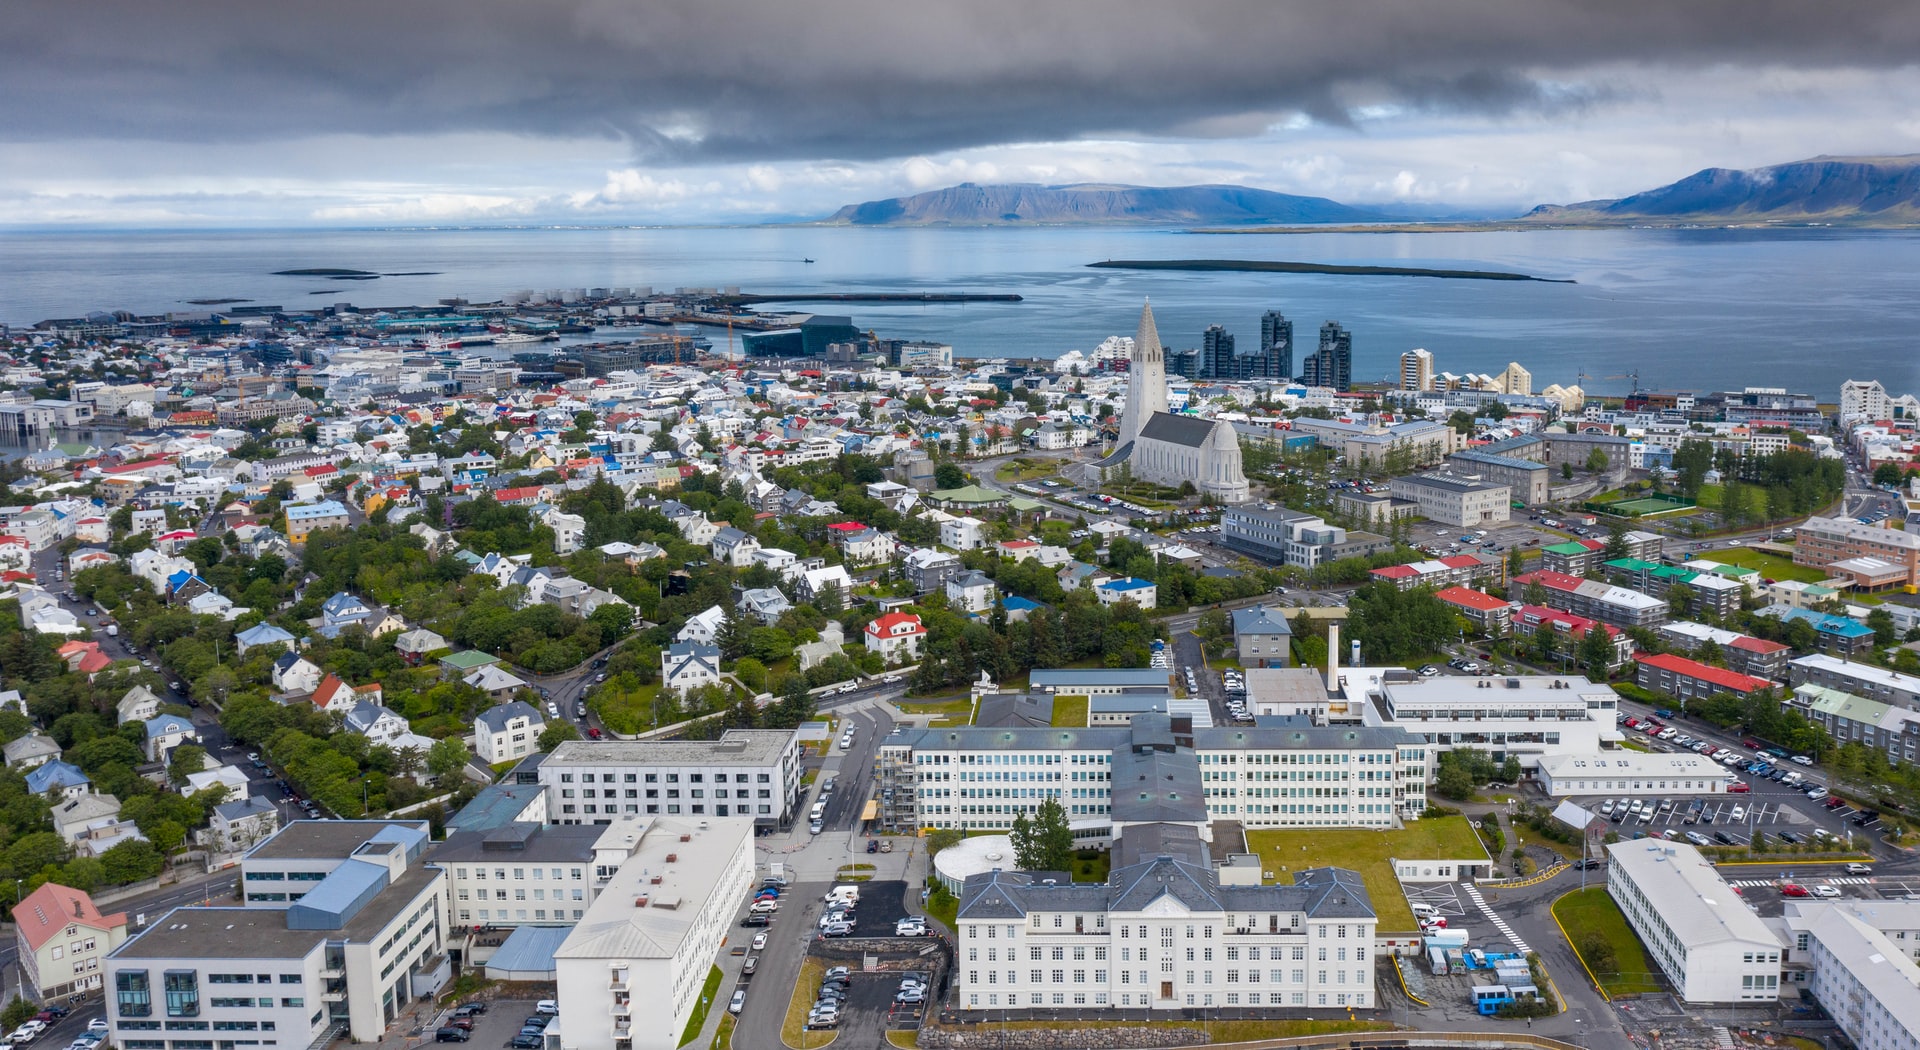 Image description: Aerial view of Reykjavik, the capital of Iceland, including its leafy suburbs and Hallgrímskirkja, a tall Lutheran church. End of alt text.